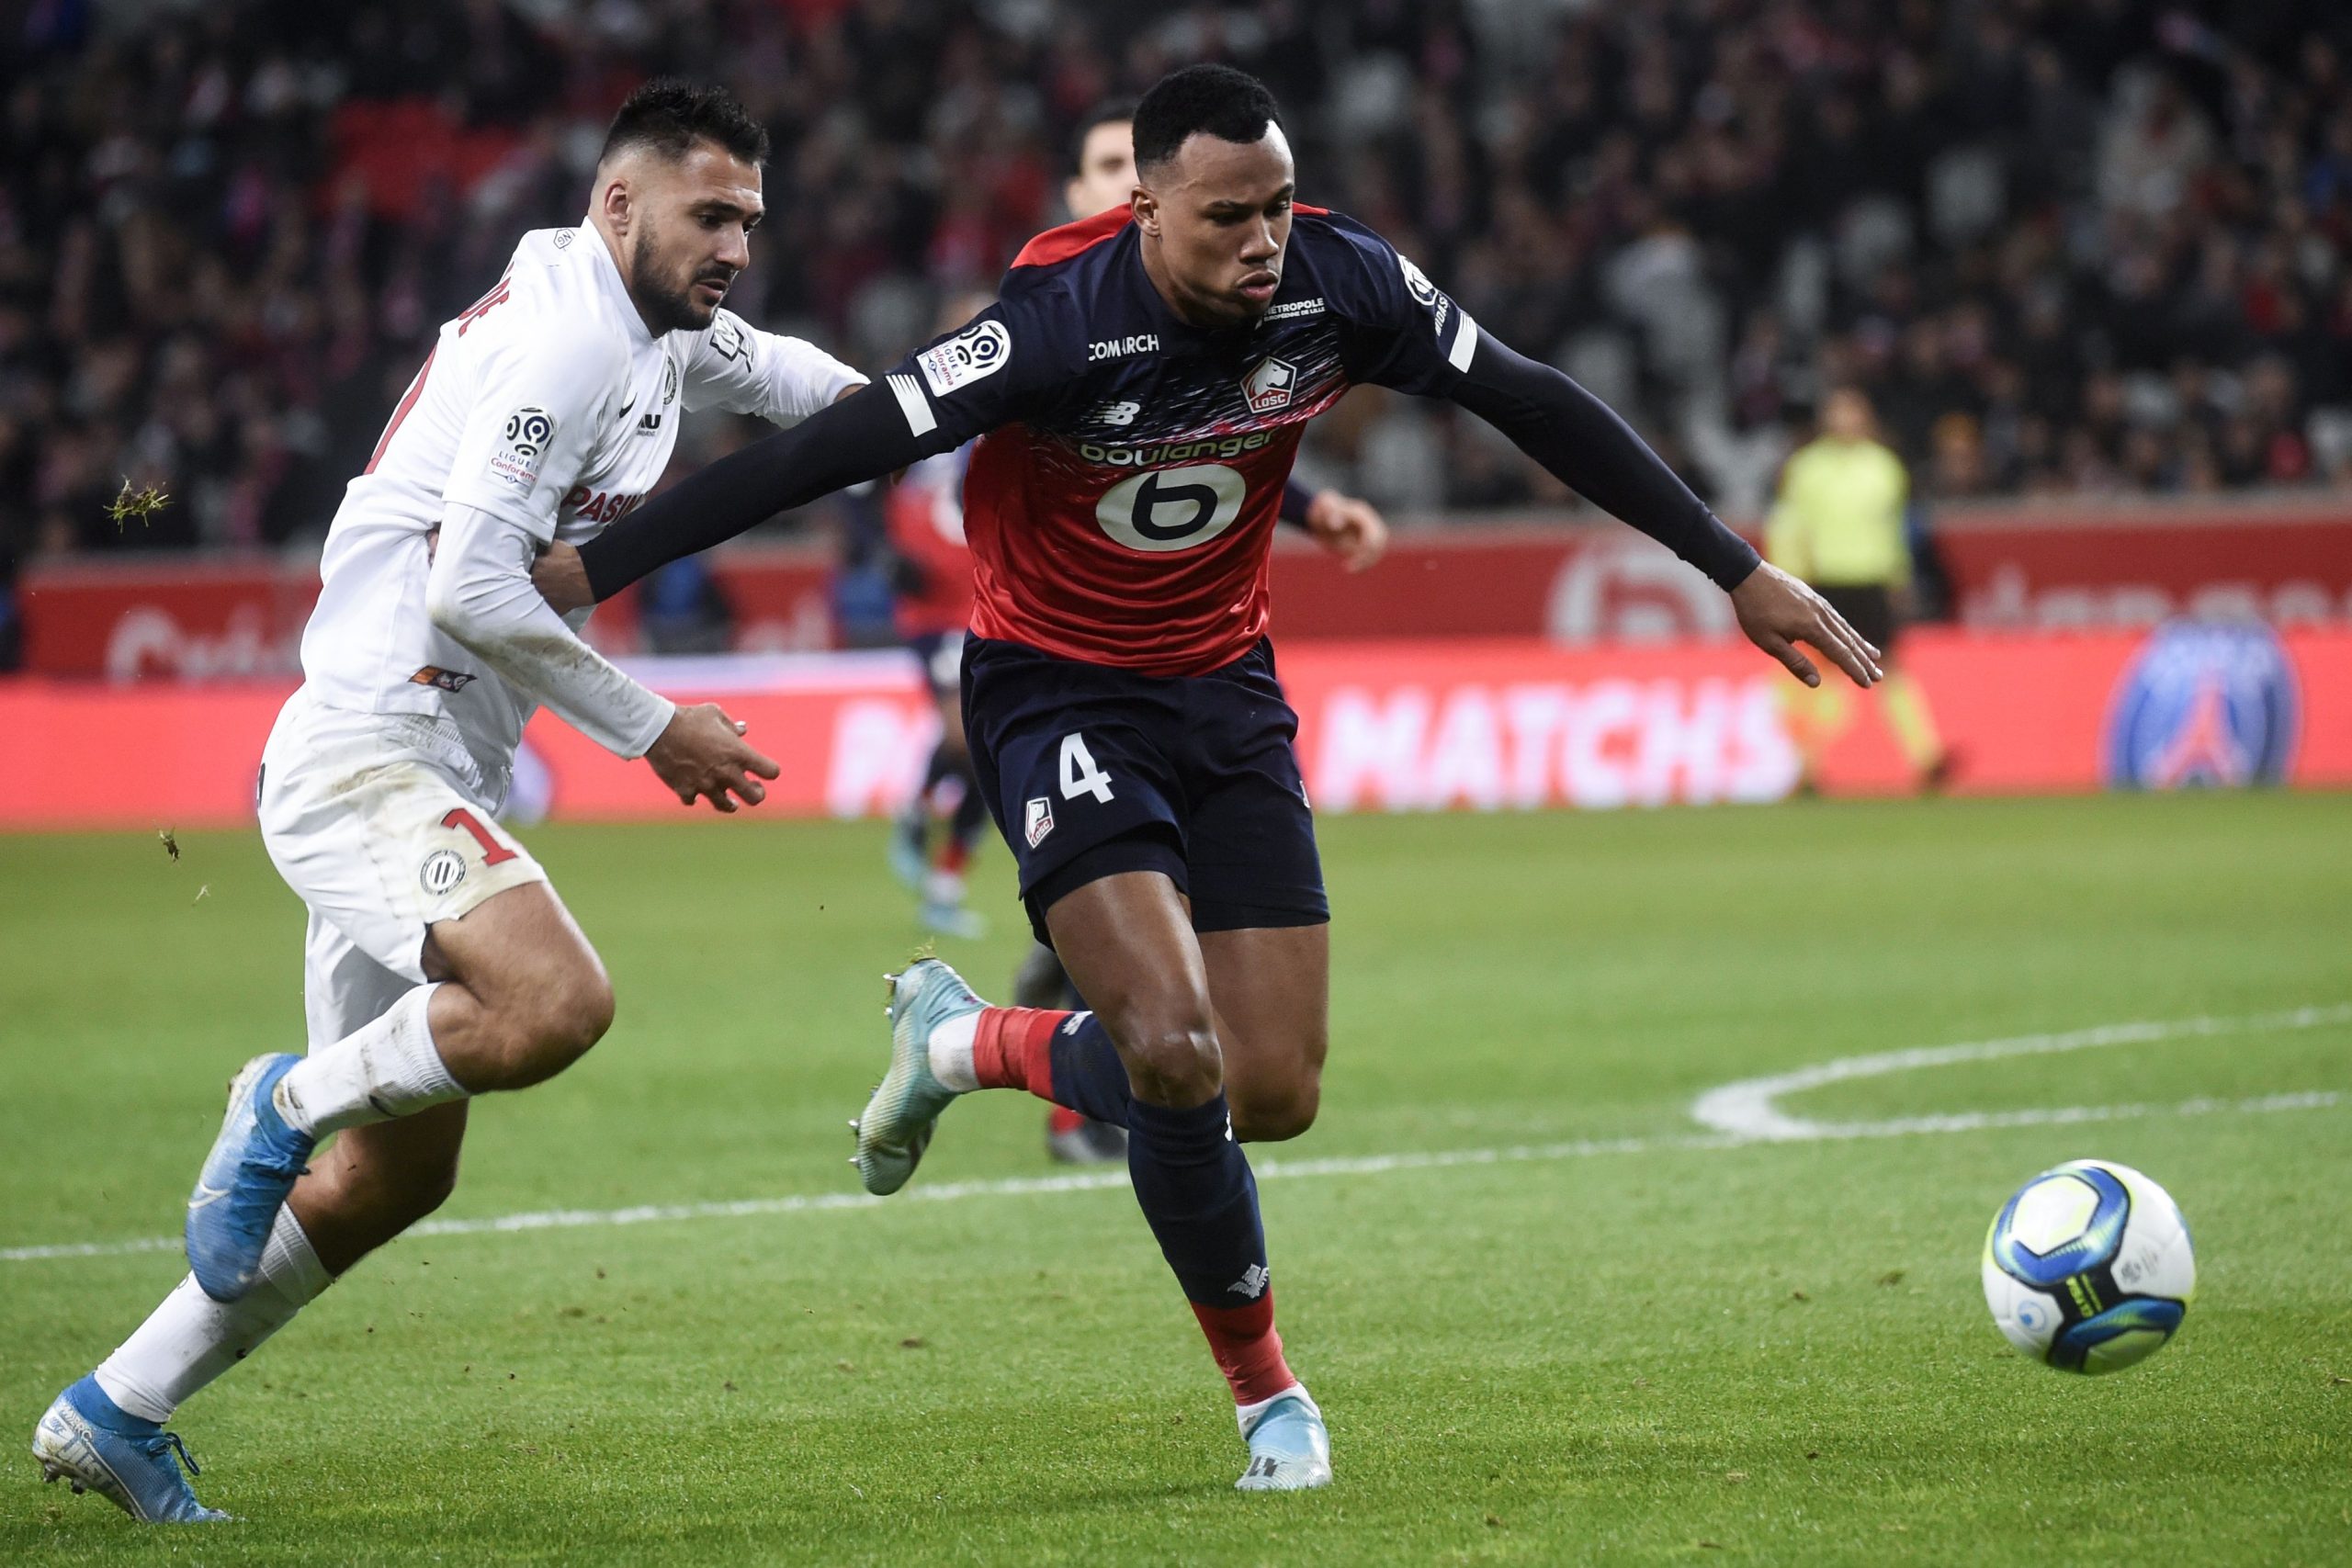 Lille's Brazilian defender Gabriel dos Santos Magalhaes (R) fights for the ball with Montpellier's French forward Gaetan Laborde during the French L1 football match between Lille OSC (LOSC) and Montpellier  Herault Sport Club (MHSC) at the Pierre Mauroy Stadium in Villeneuve-d'Ascq, on December 13, 2019. (Photo by FRANCOIS LO PRESTI/AFP via Getty Images)